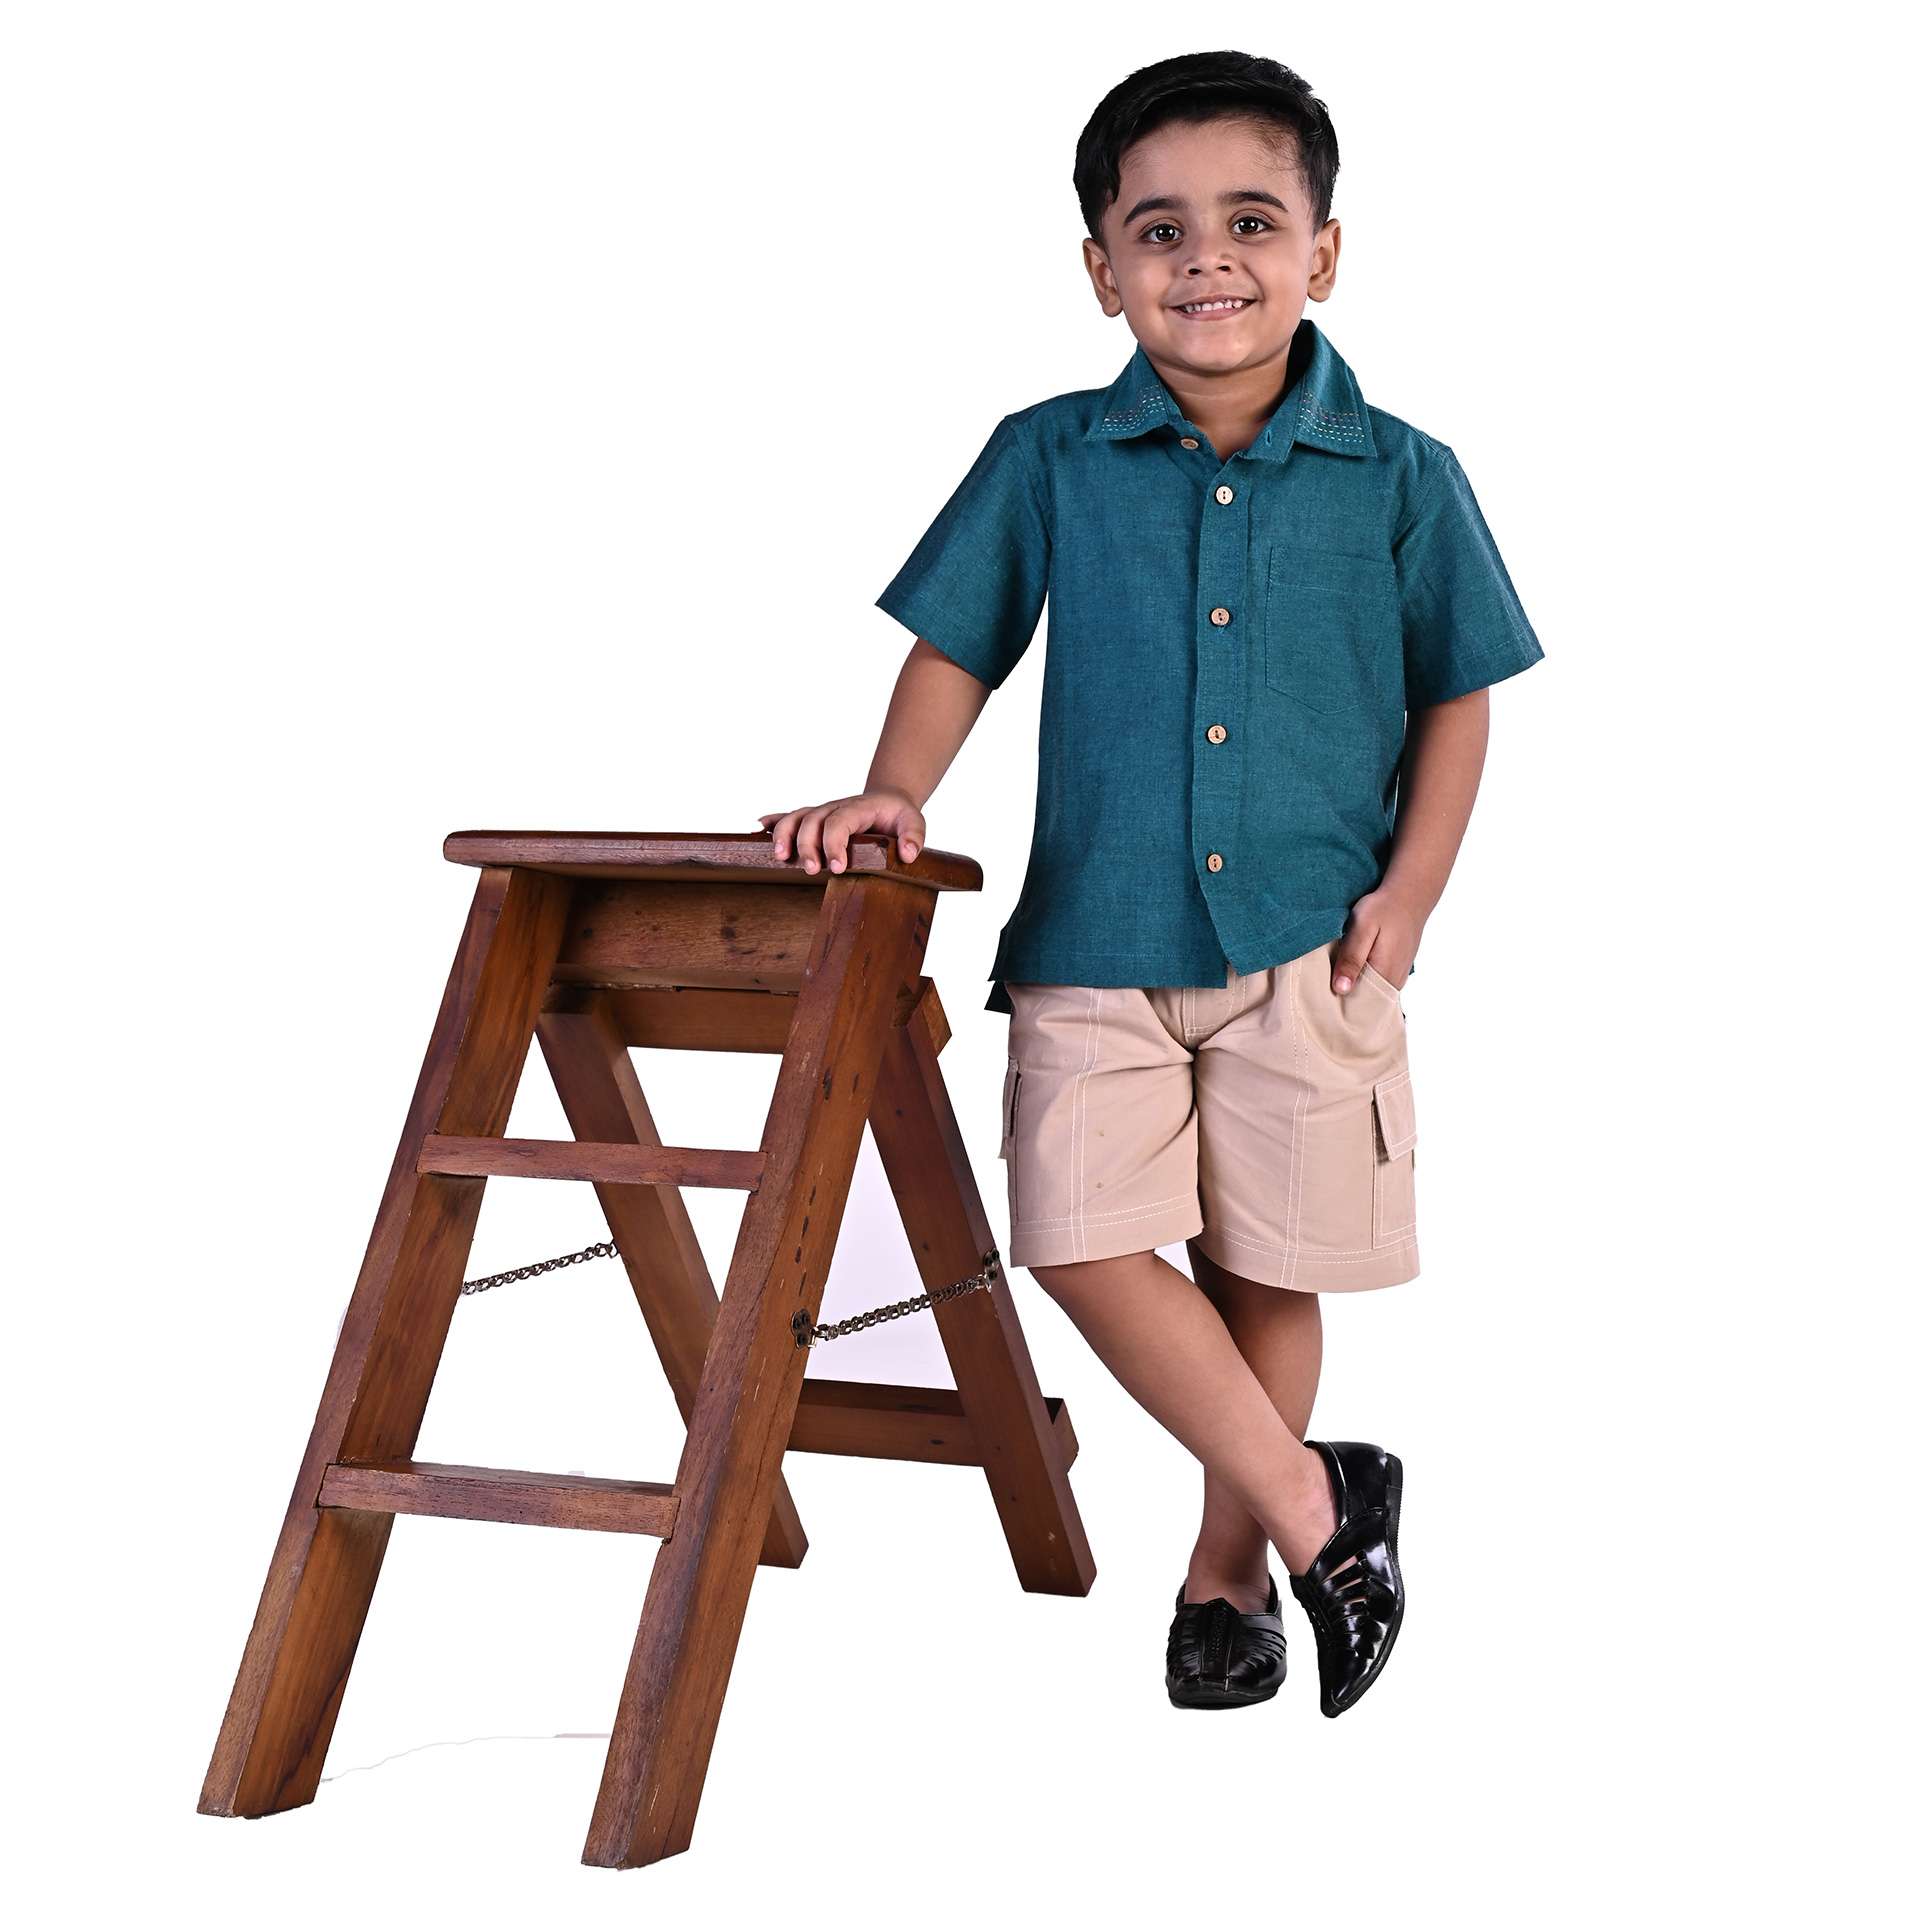 Boy poses by a step ladder wearing a dark teal shirt and khaki casual cargo shorts